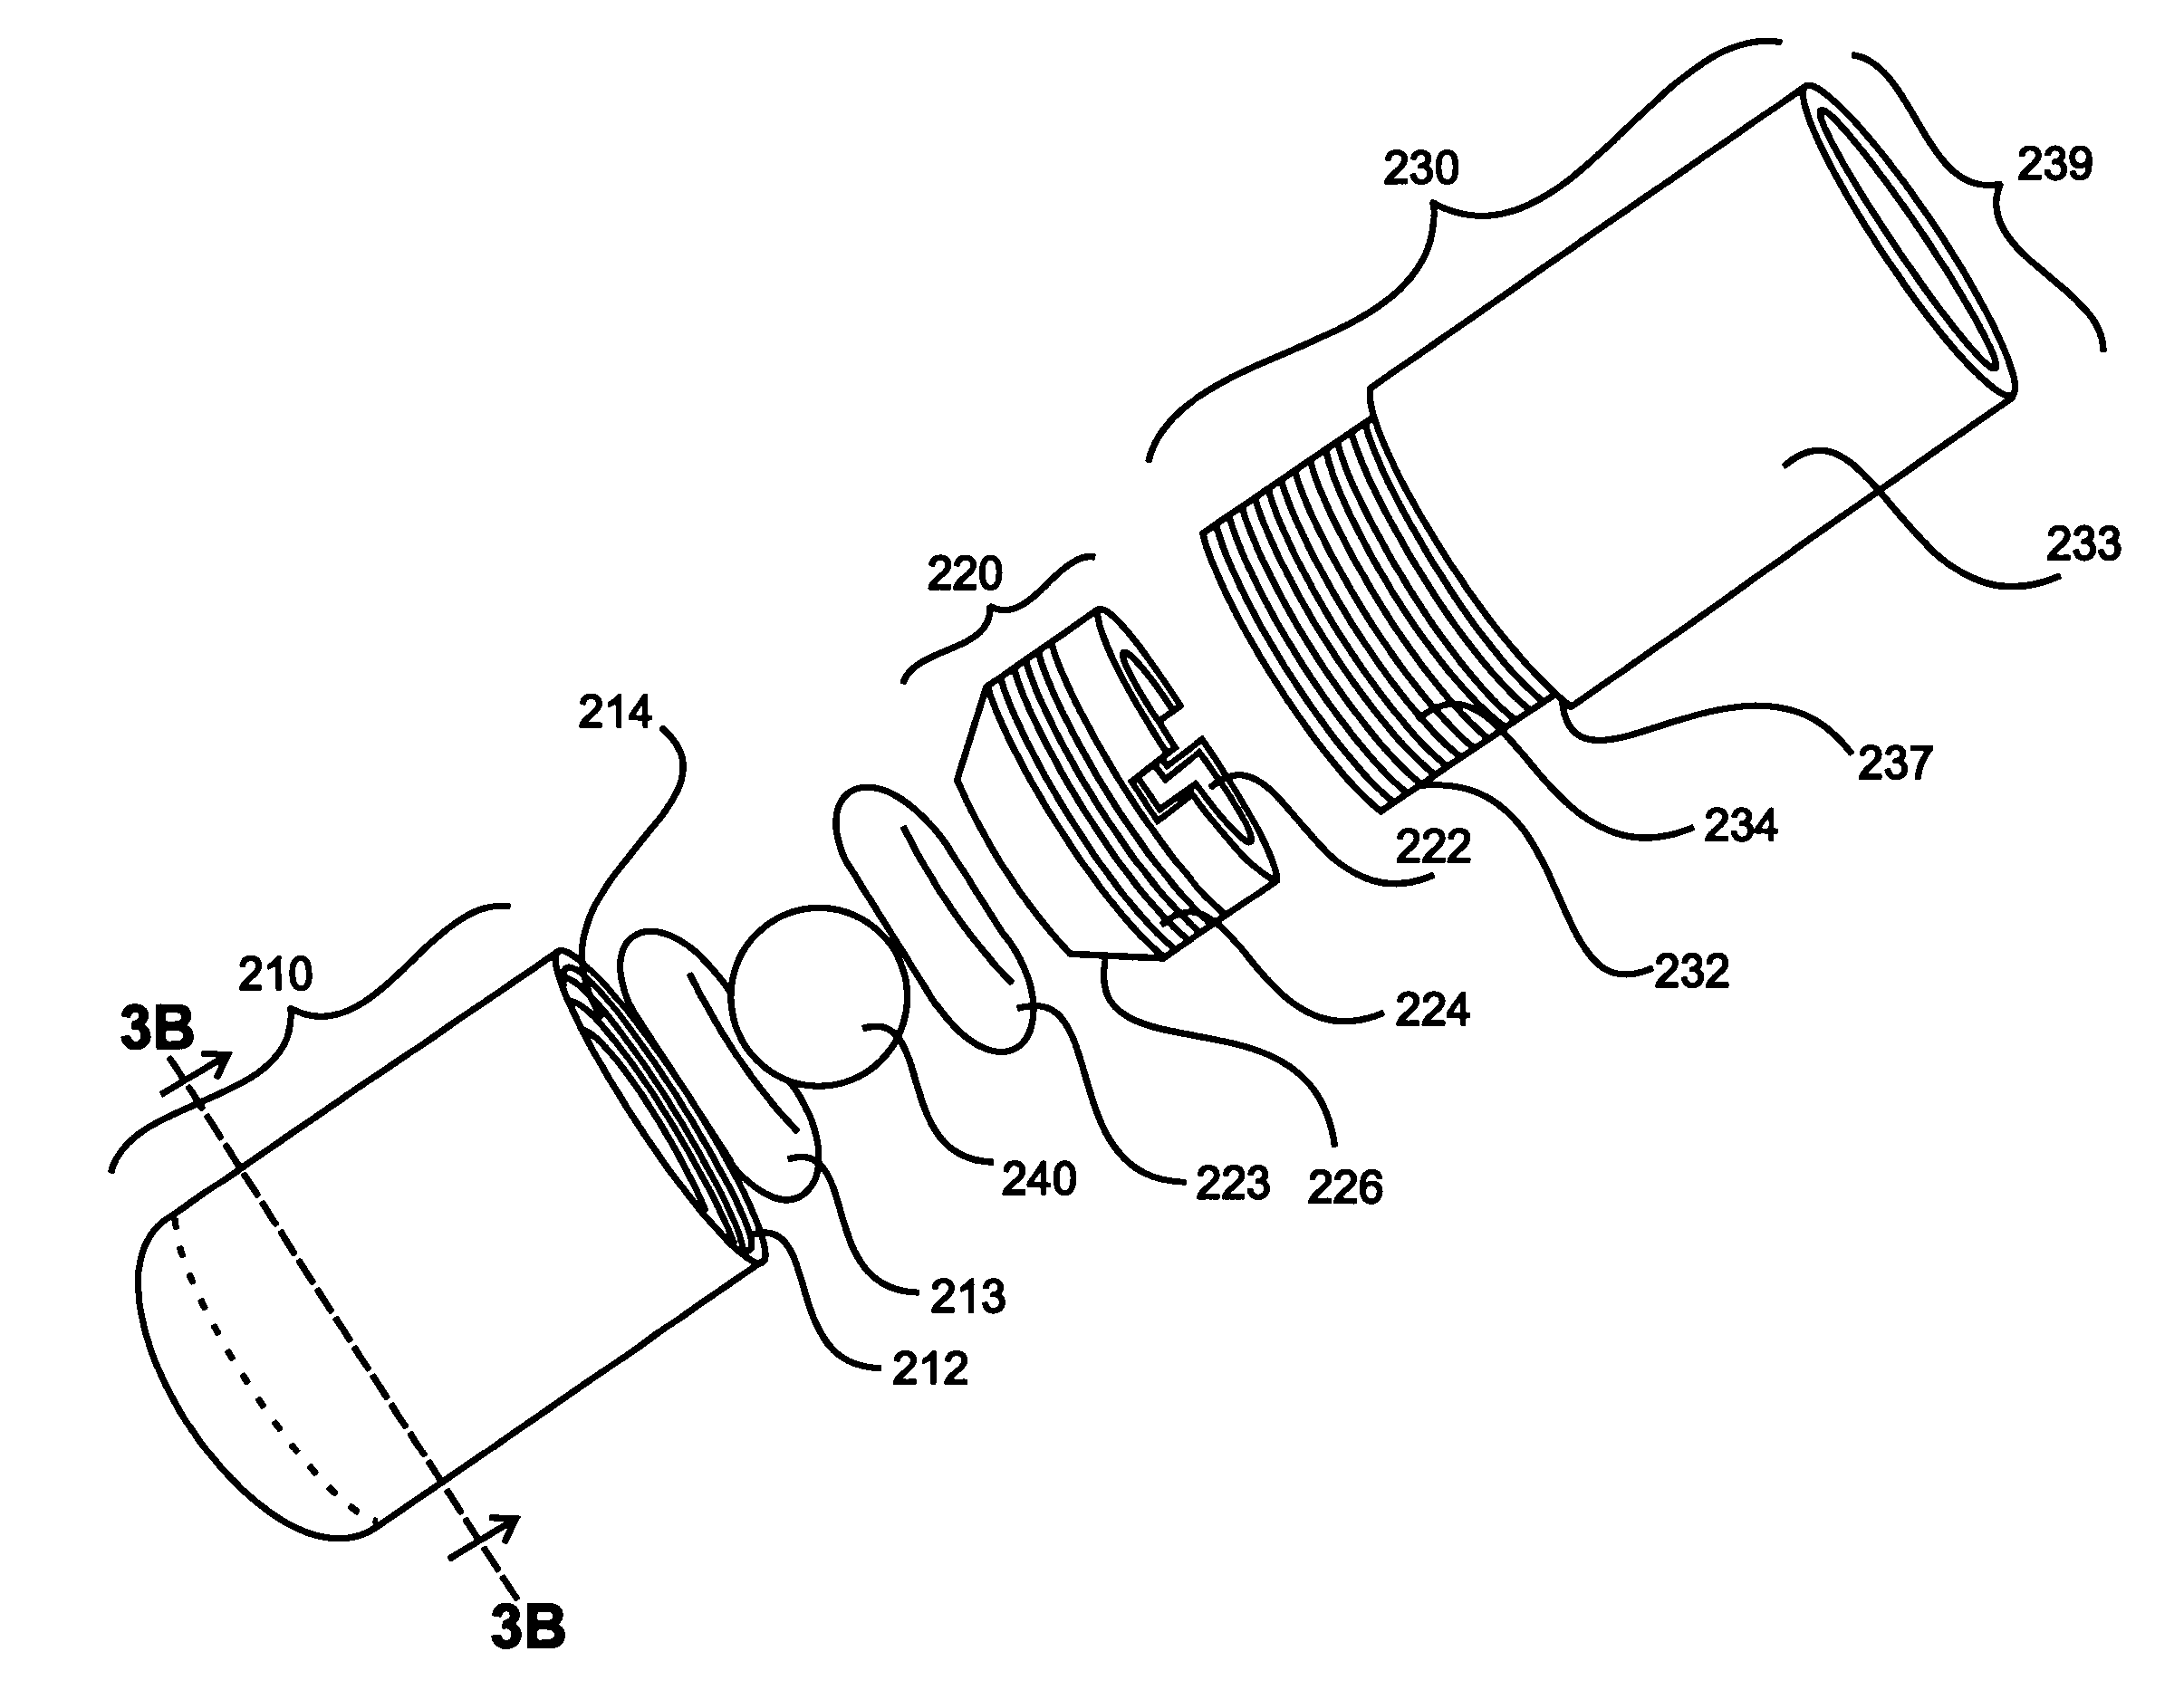 Optical immersion probe incorporating a spherical lens